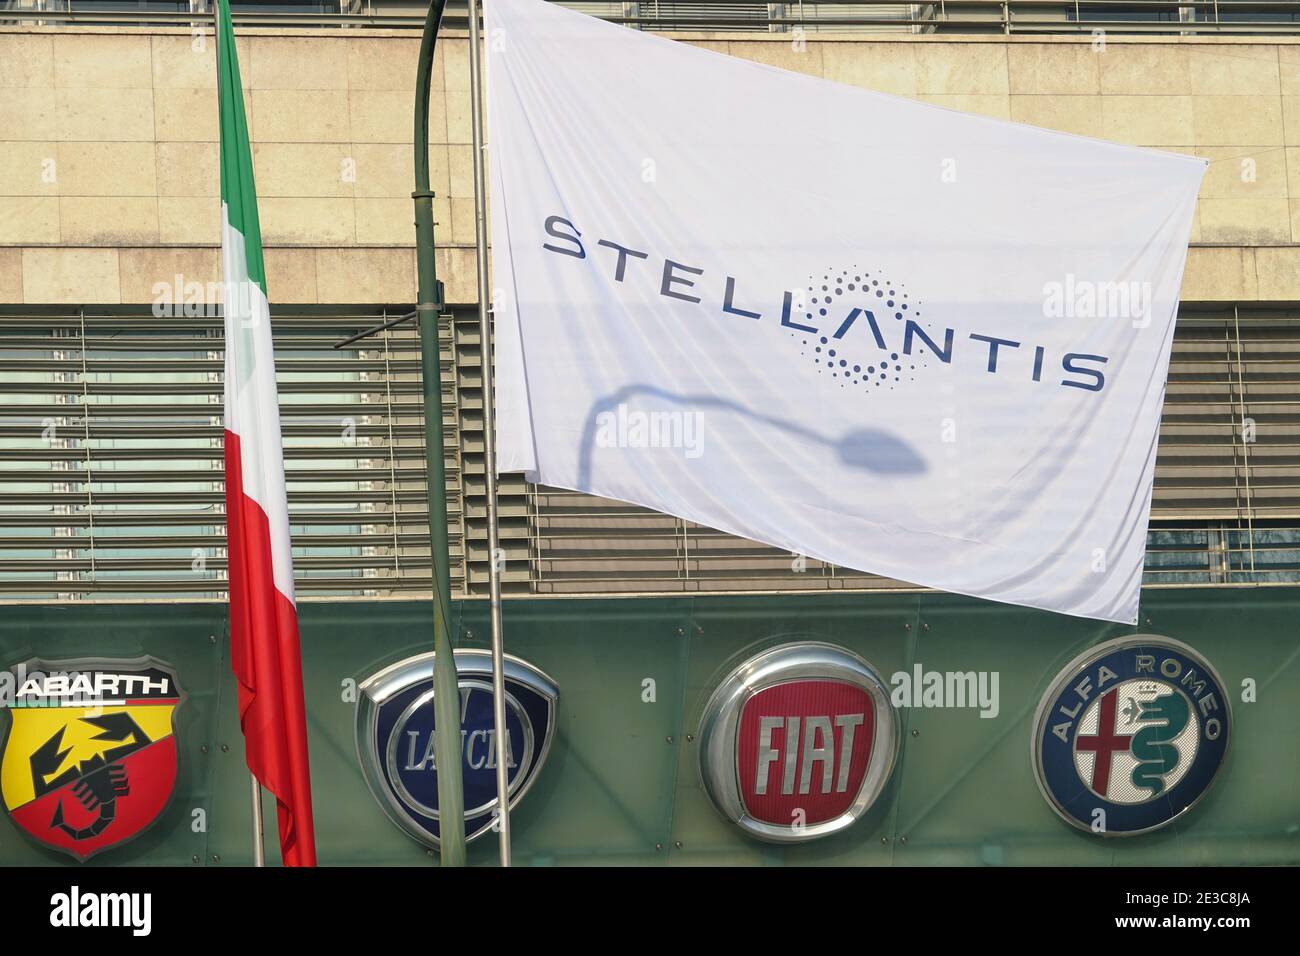 The Stellantis logo and new flags are installed at Mirafiori. Stellantis was created from the merger of the FCA and PSA Stock Photo